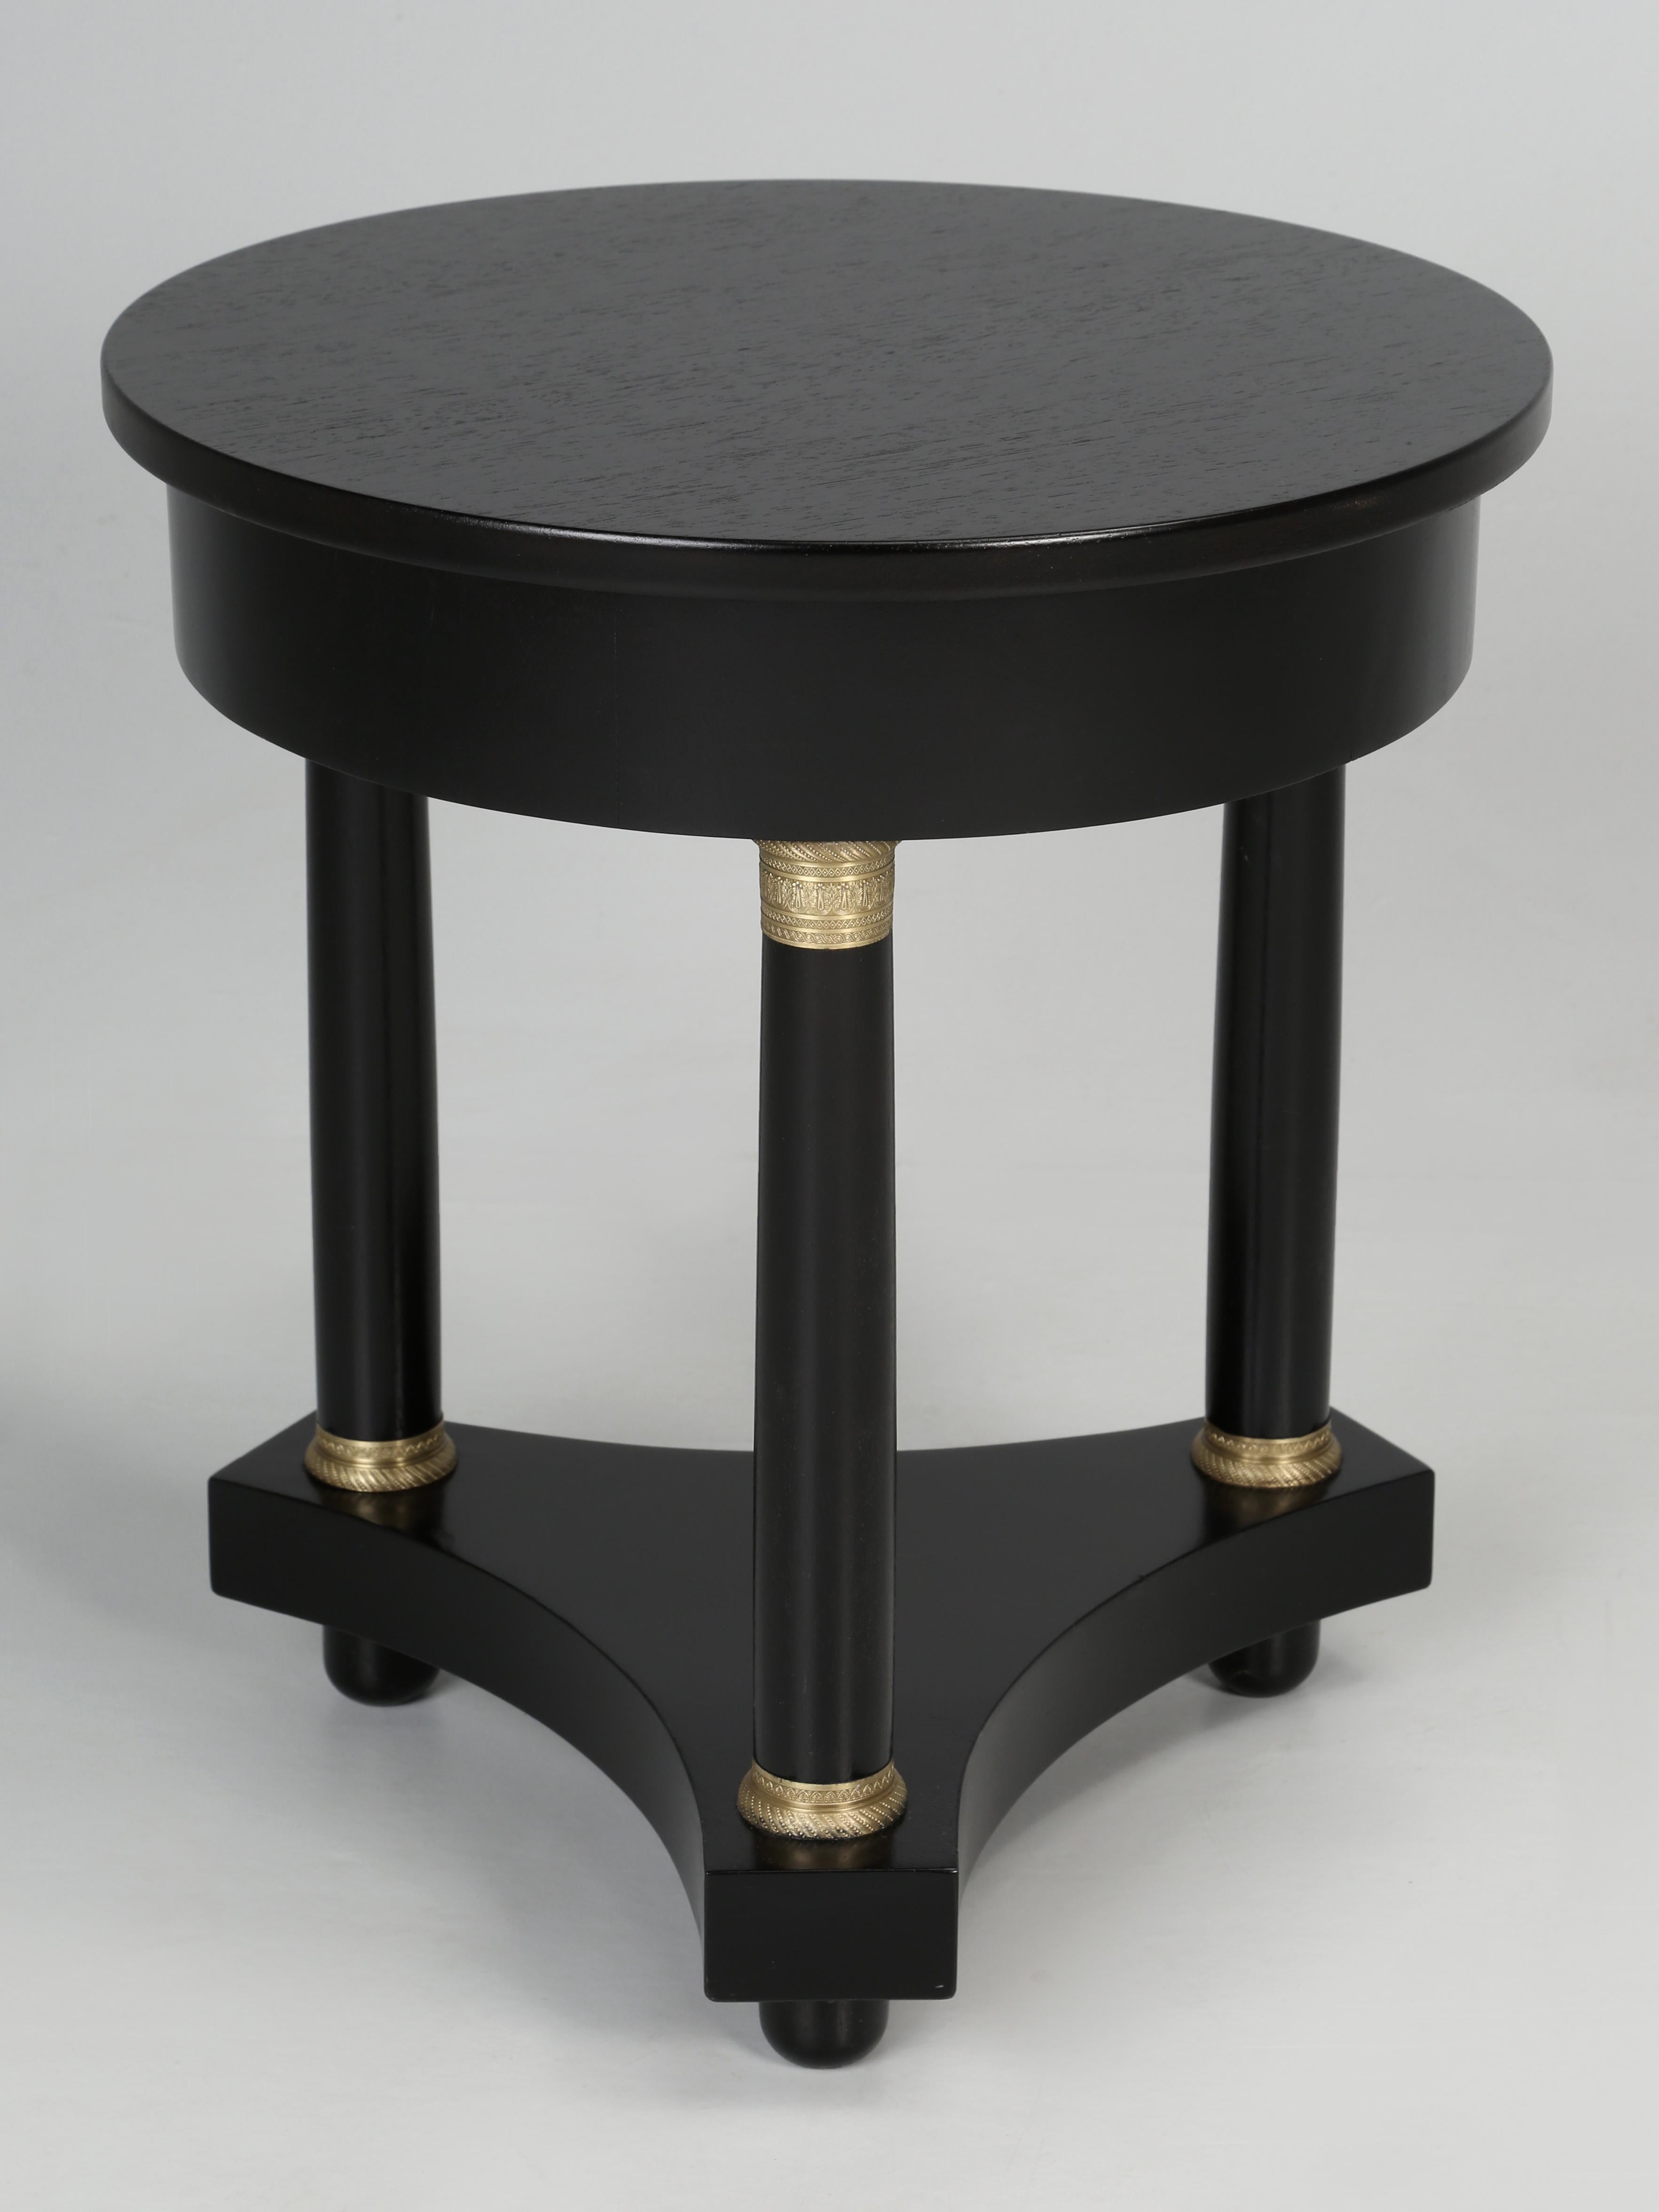 Vintage French Empire side table or Empire end table that was recently restored in our Old Plank workshop. The finishing department hand-sanded and stripped the mahogany, without the use of any harsh chemicals and installed an Old School Ebonized